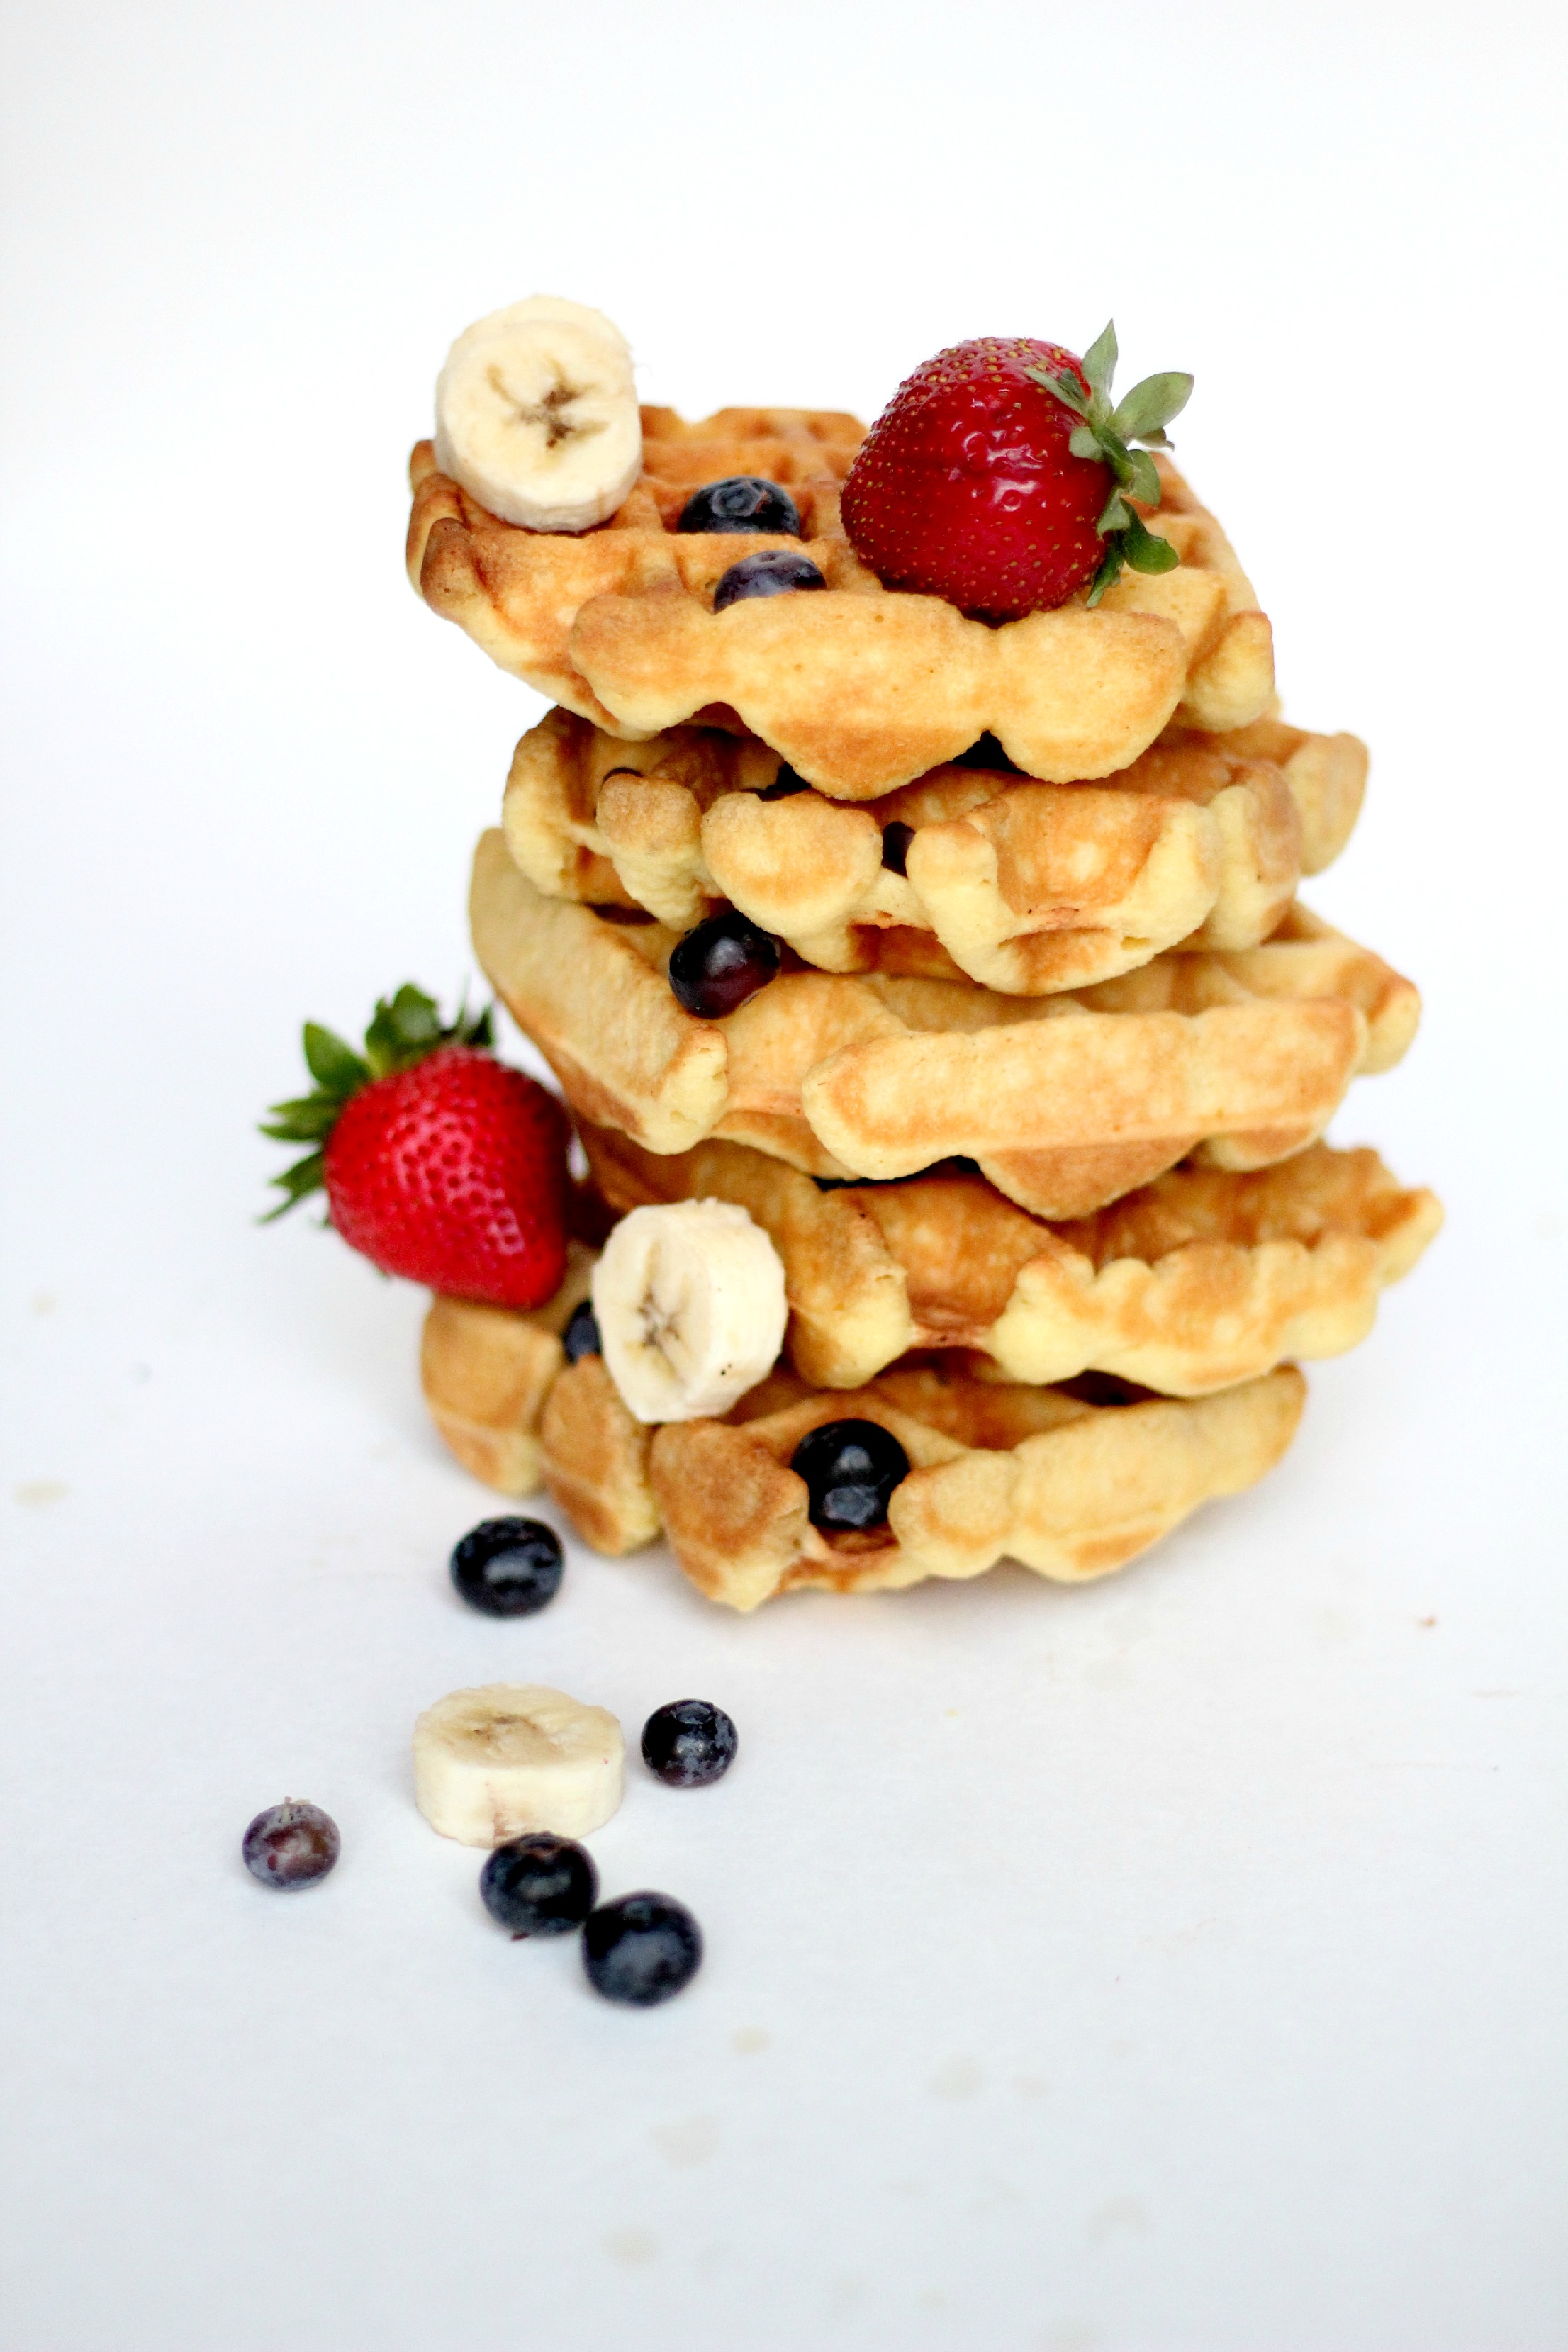 This is the best Grain and Gluten Free Waffle Recipe! Top with your favorite toppings.